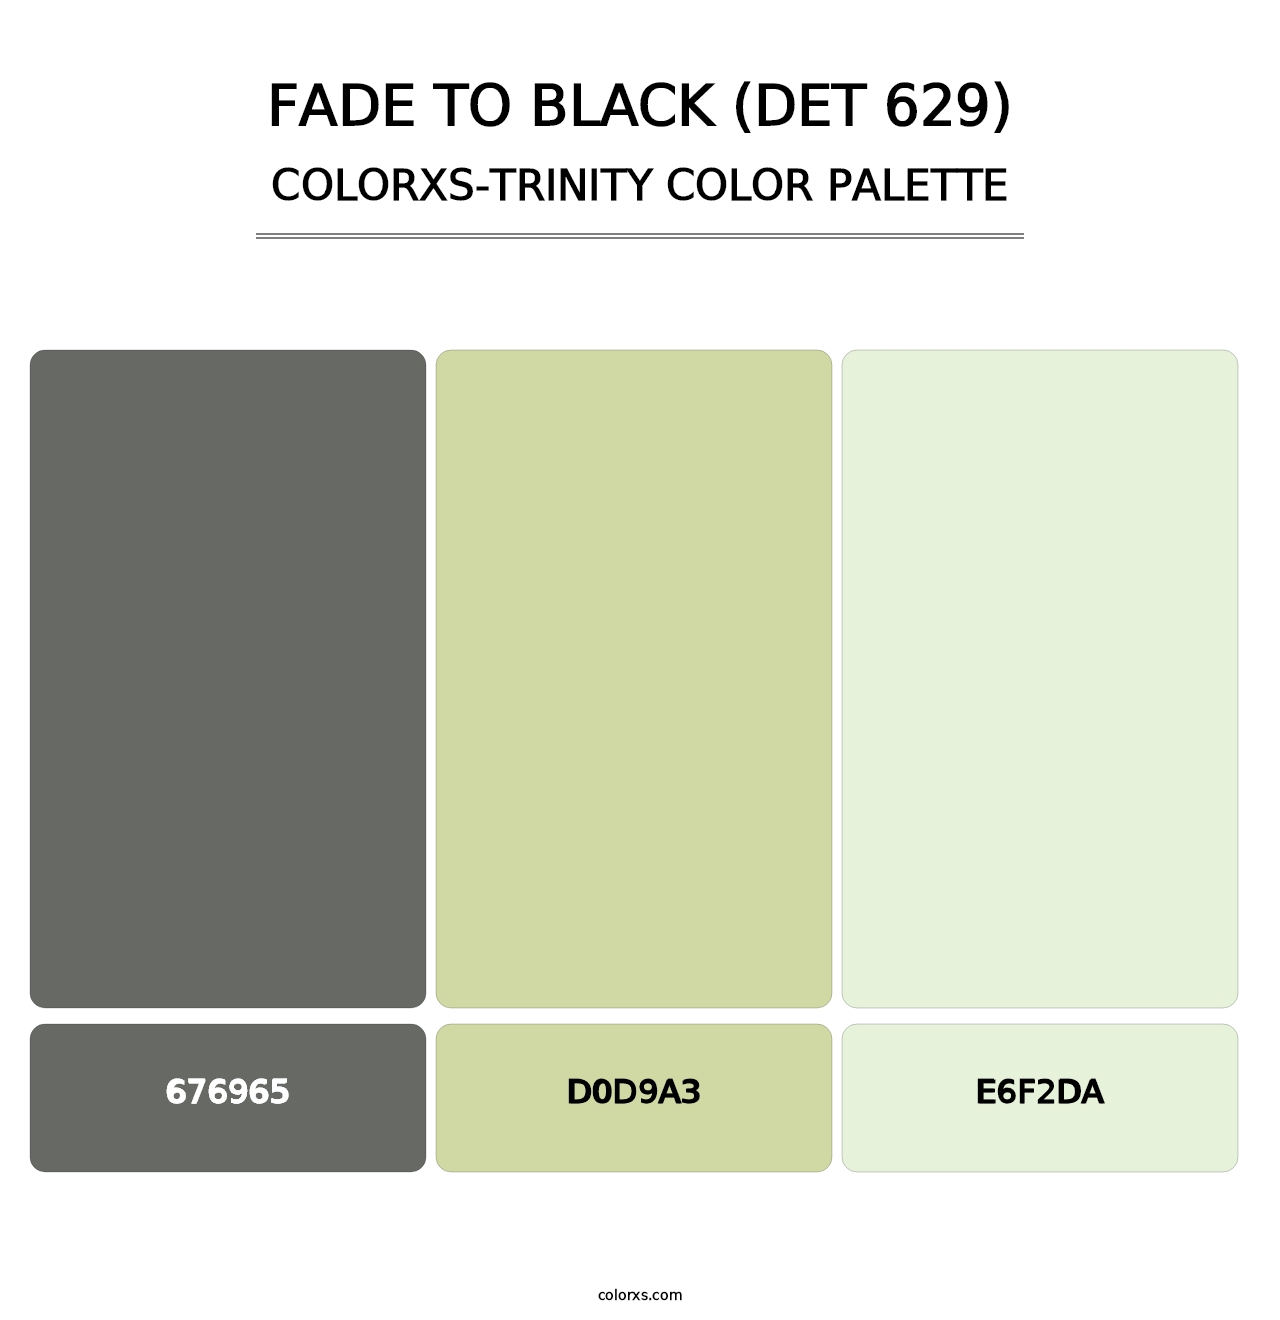 Fade to Black (DET 629) - Colorxs Trinity Palette